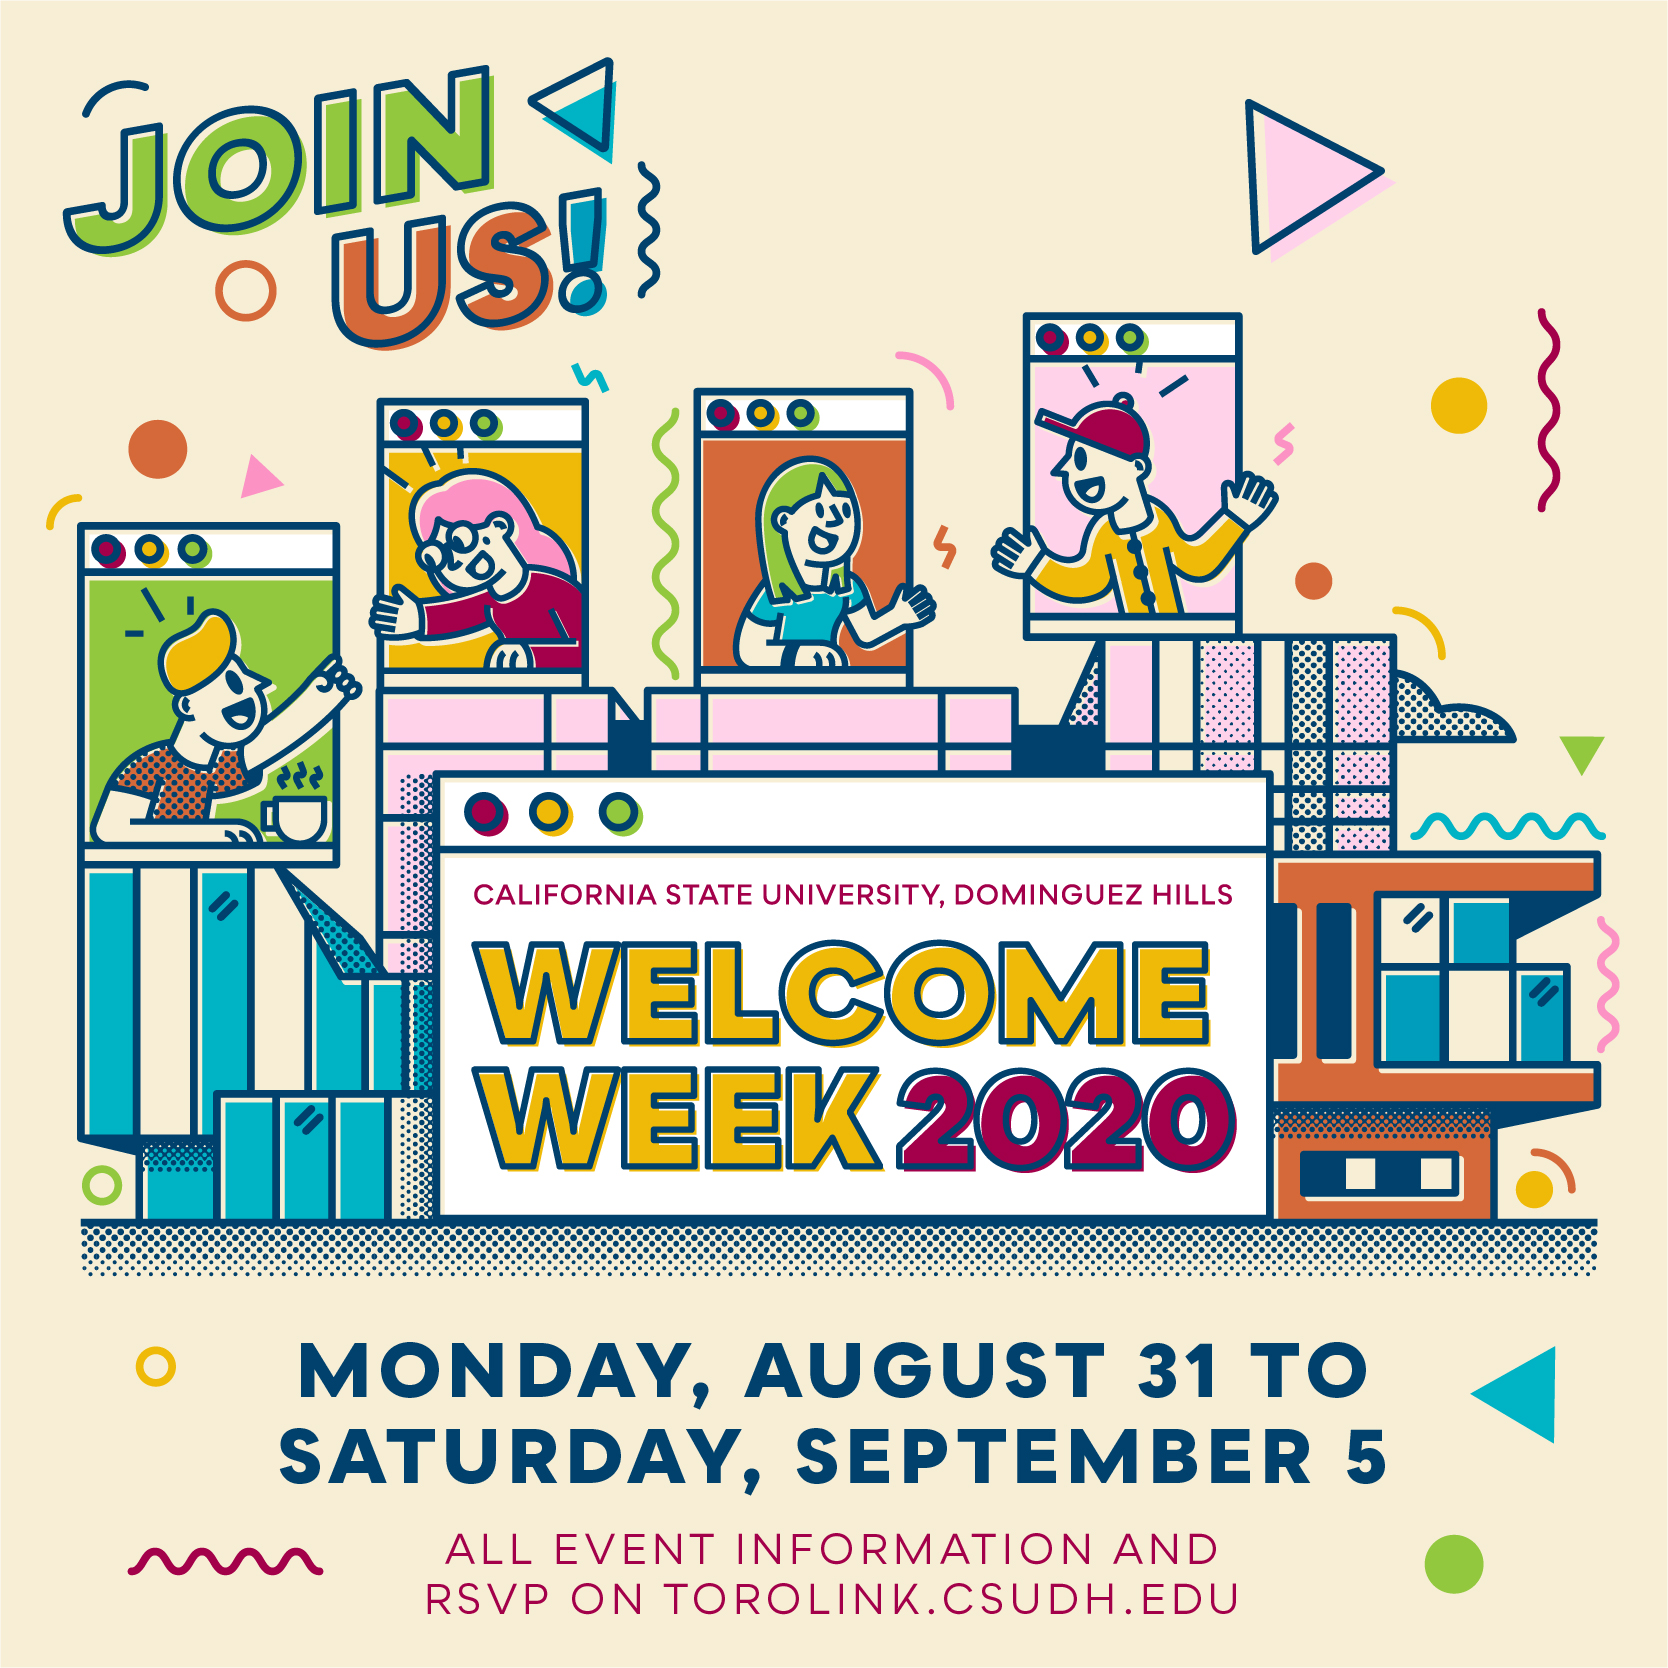 WELCOME WEEK 2020: Plan Now for Your Post-Pandemic Career